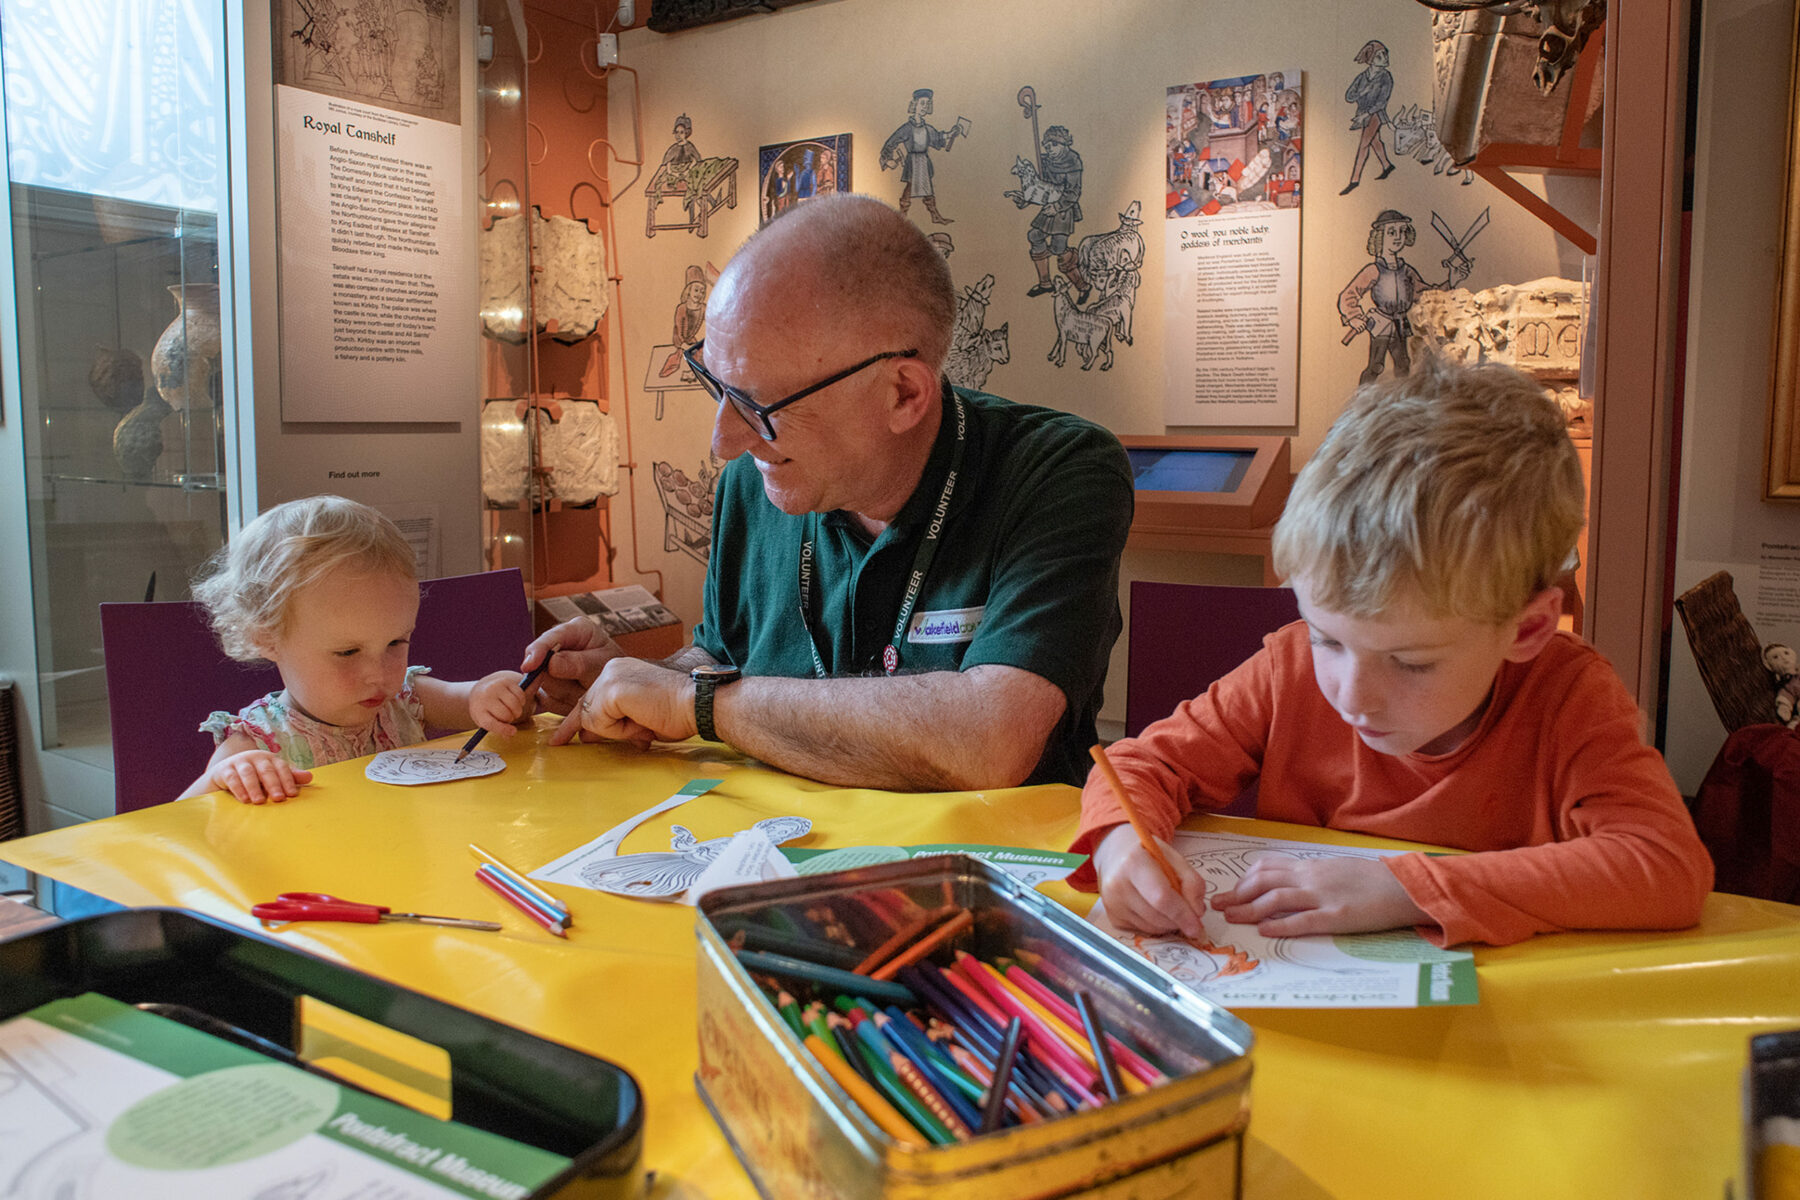 Summer at Pontefract Museum, one of the Free and Low Cost Things to do in Wakefield